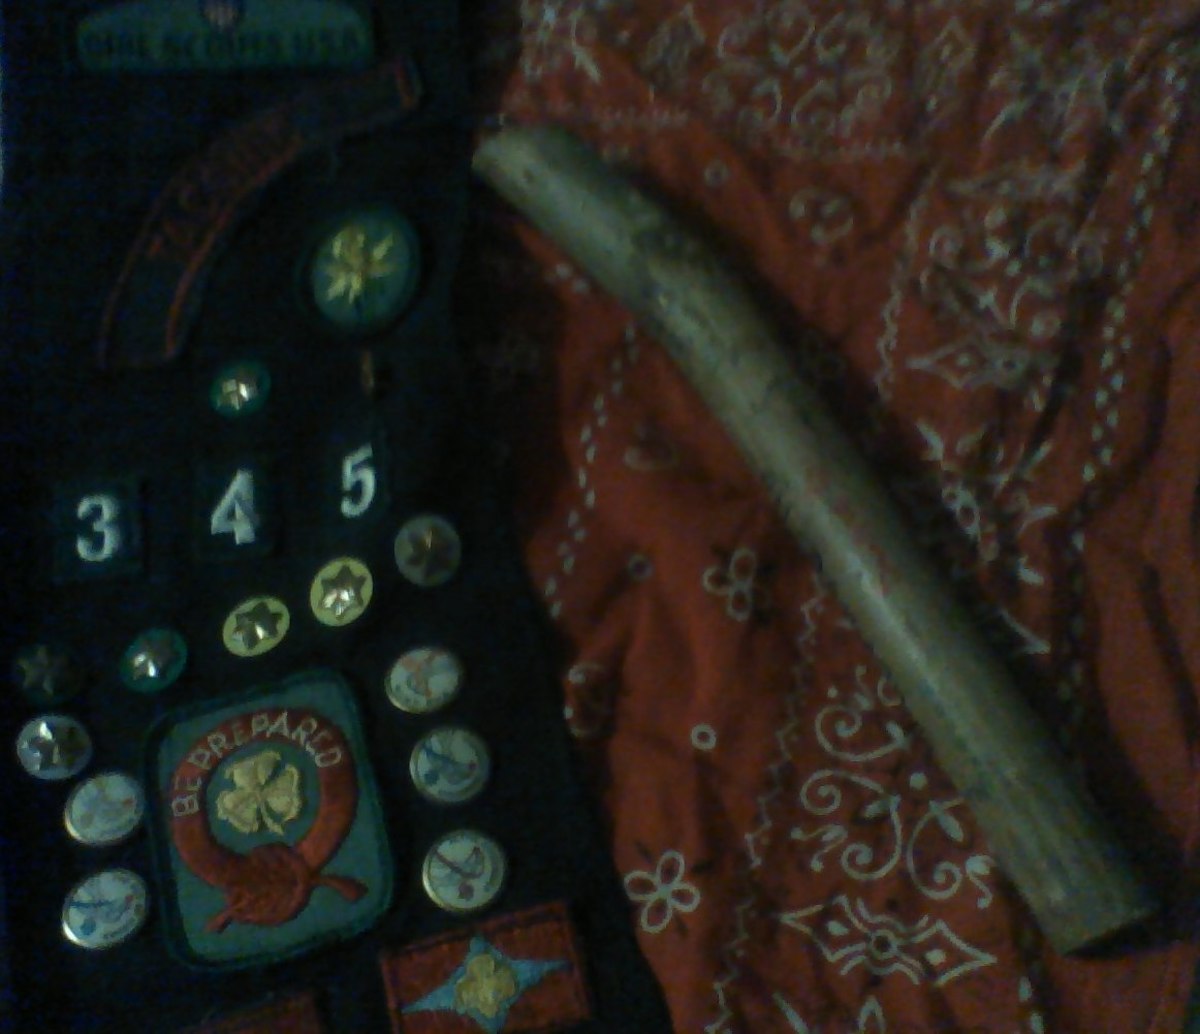 My girl scout sash, the bandanna I loved to wear, and the friendship stick from camp